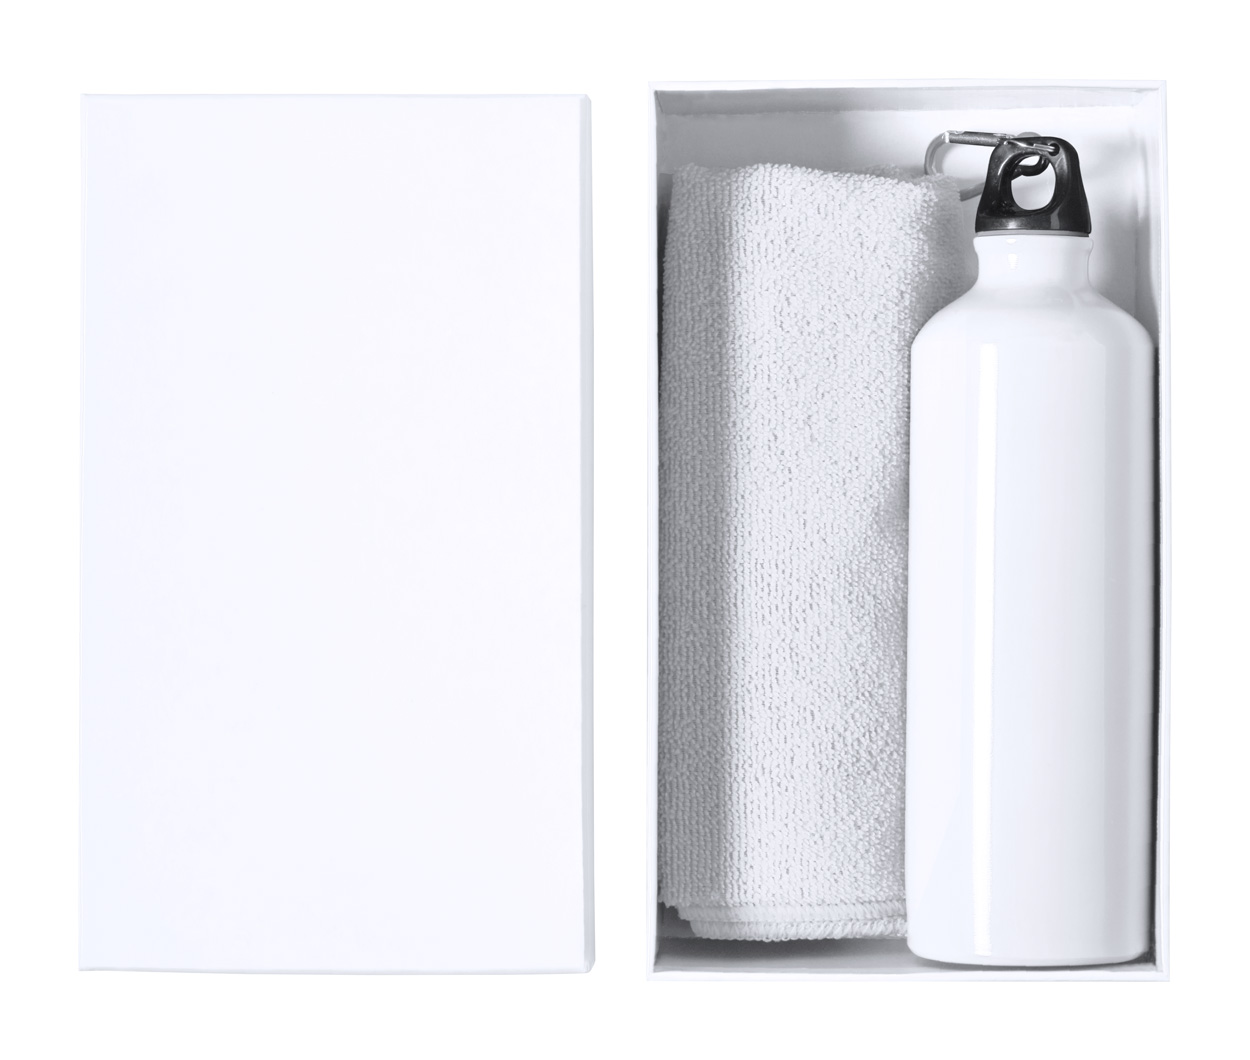 Cloister sports bottle and towel set - white